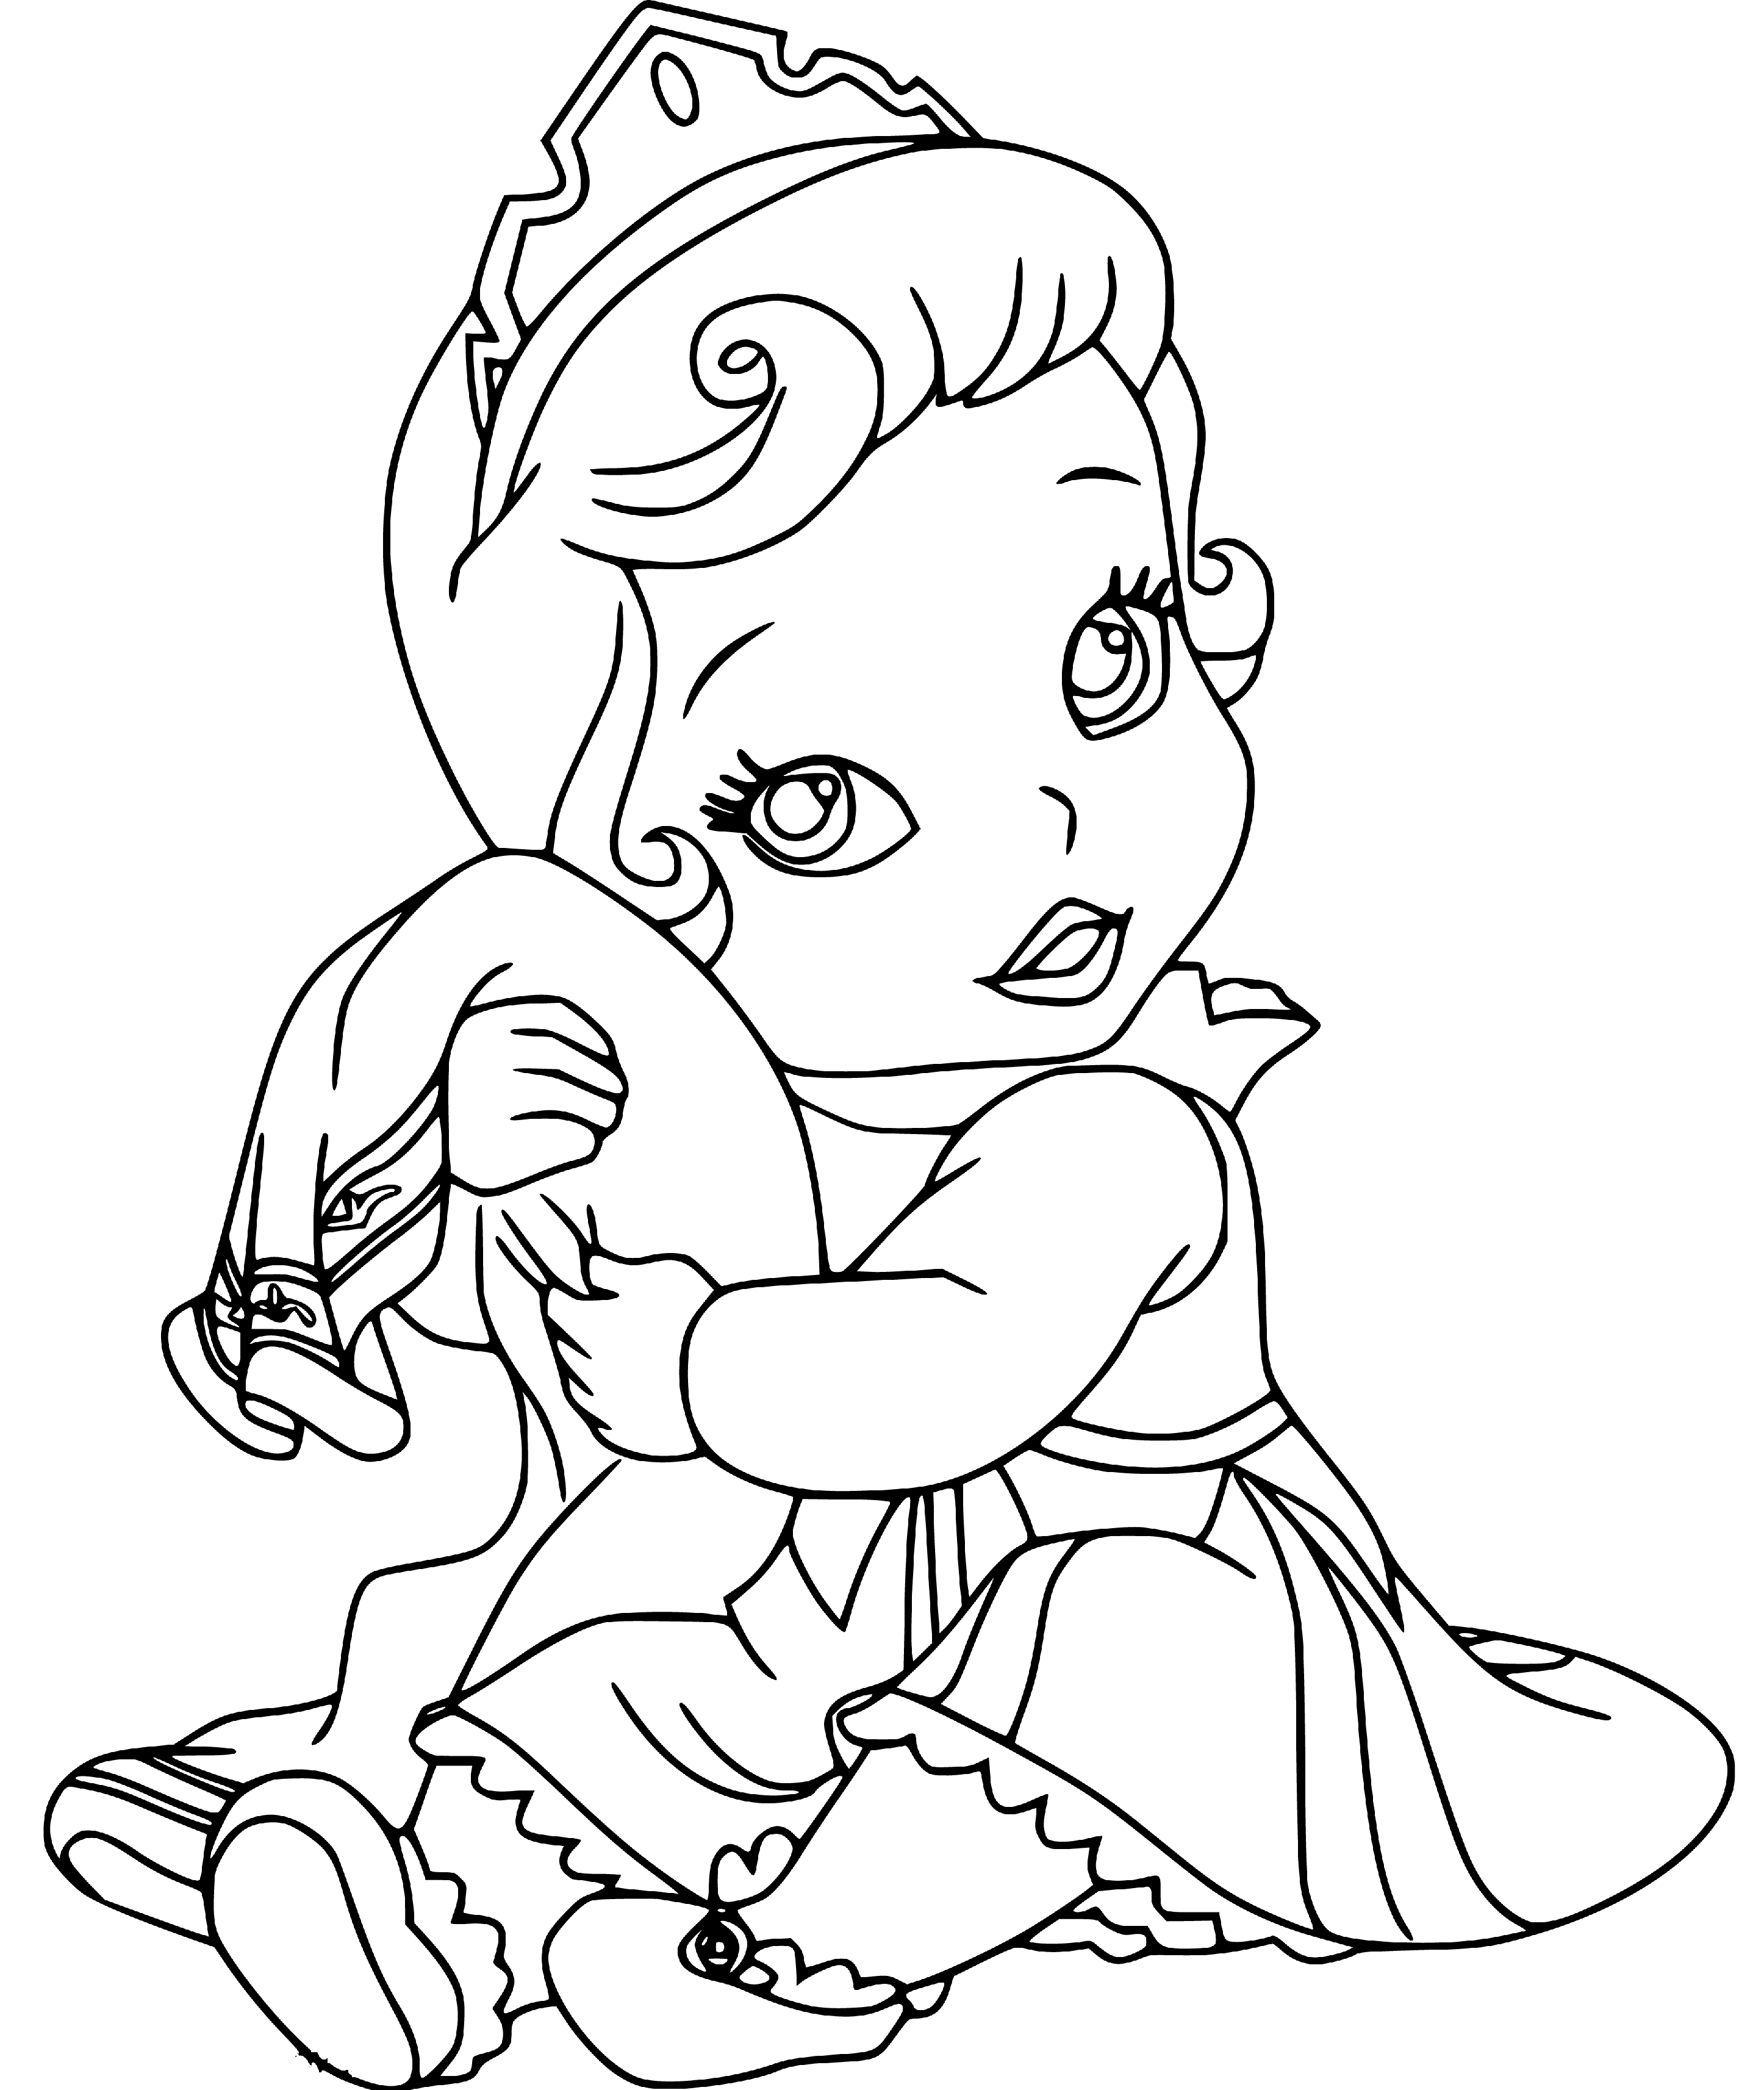 Baby Aurora Coloring Page for Kids to Print - SheetalColor.com